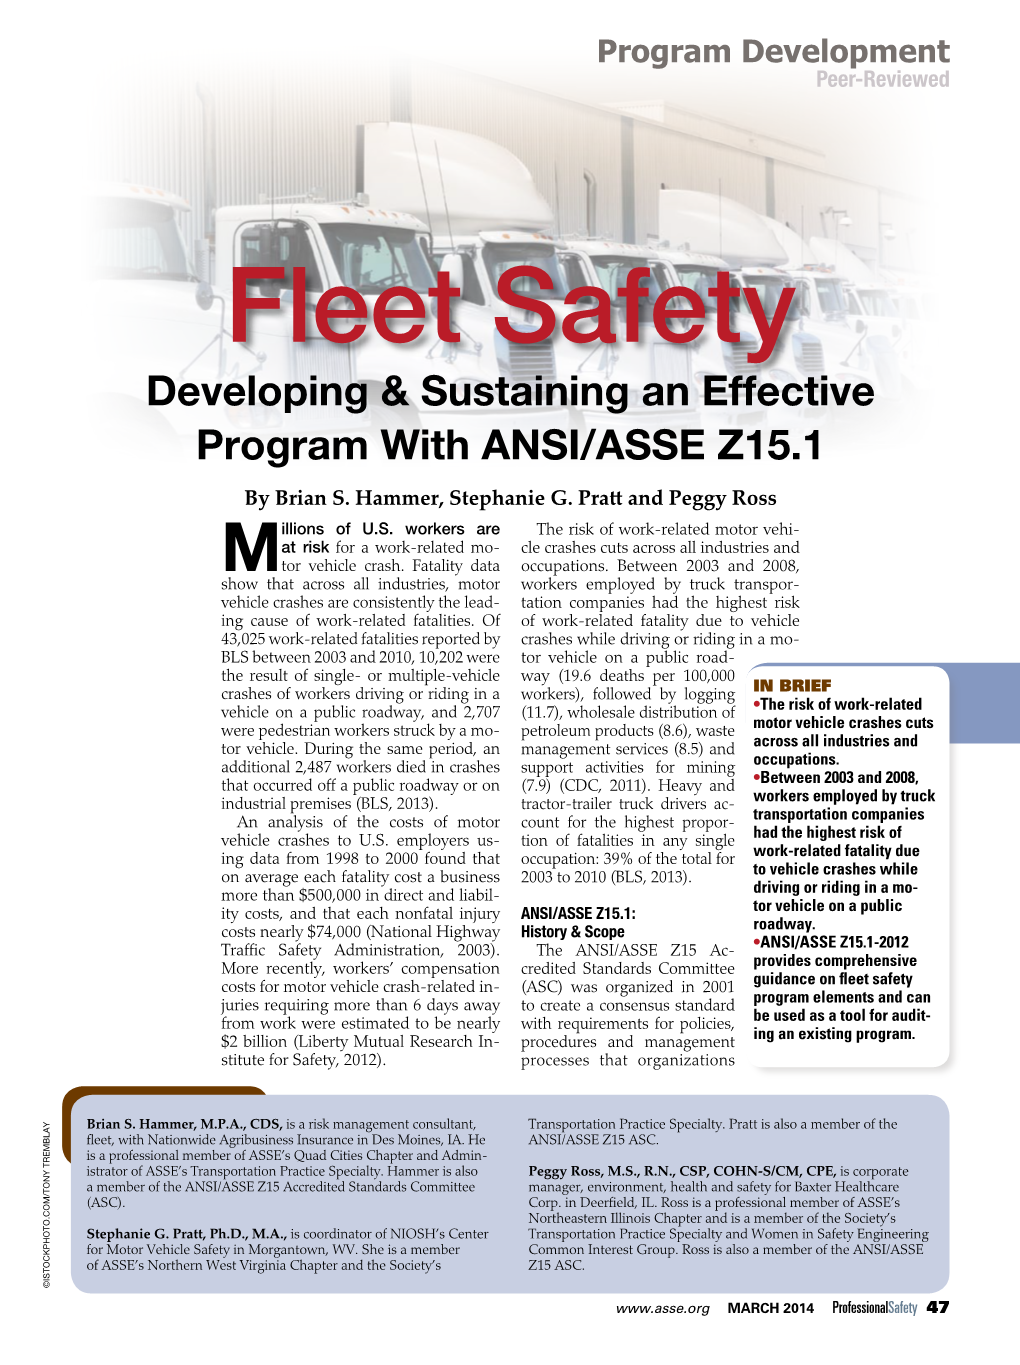 Fleet Safety Developing & Sustaining an Effective Program with ANSI/ASSE Z15.1